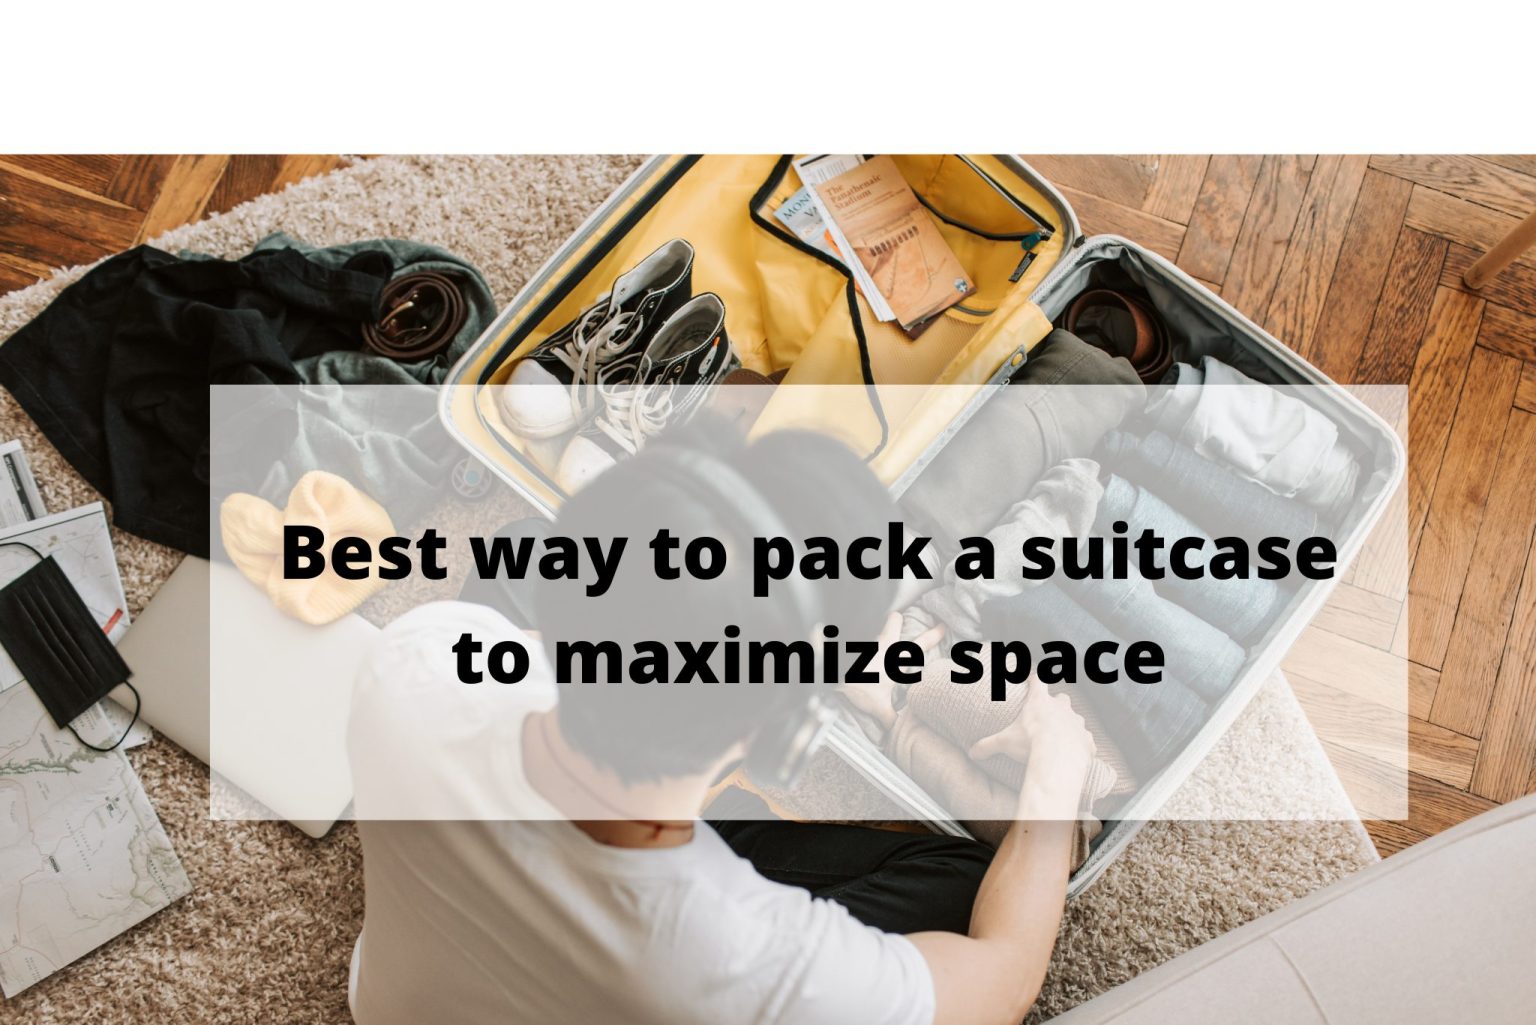 Best way to pack a suitcase to maximize space